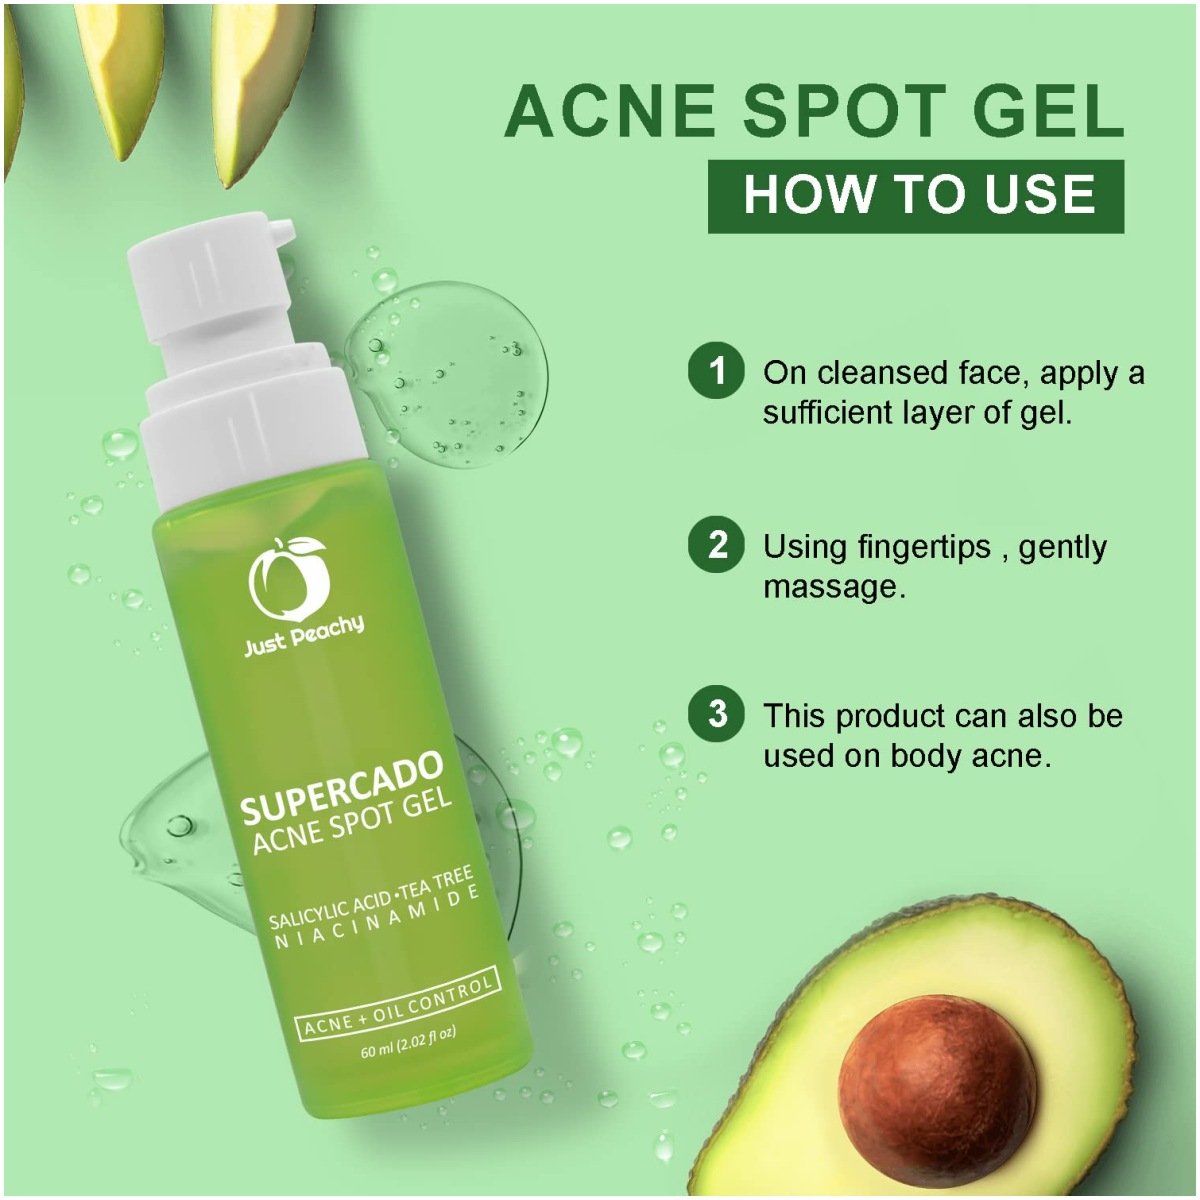 Just Peachy SUPERCADO Acne Spot Gel With 2% Salicylic Acid, Niacinamide, Avocado and Tea Tree | For Breakouts, Pimples & Bumps on Shoulders, Bum & Back | Oil Balancing, Pore Tightening Gel 60 ml